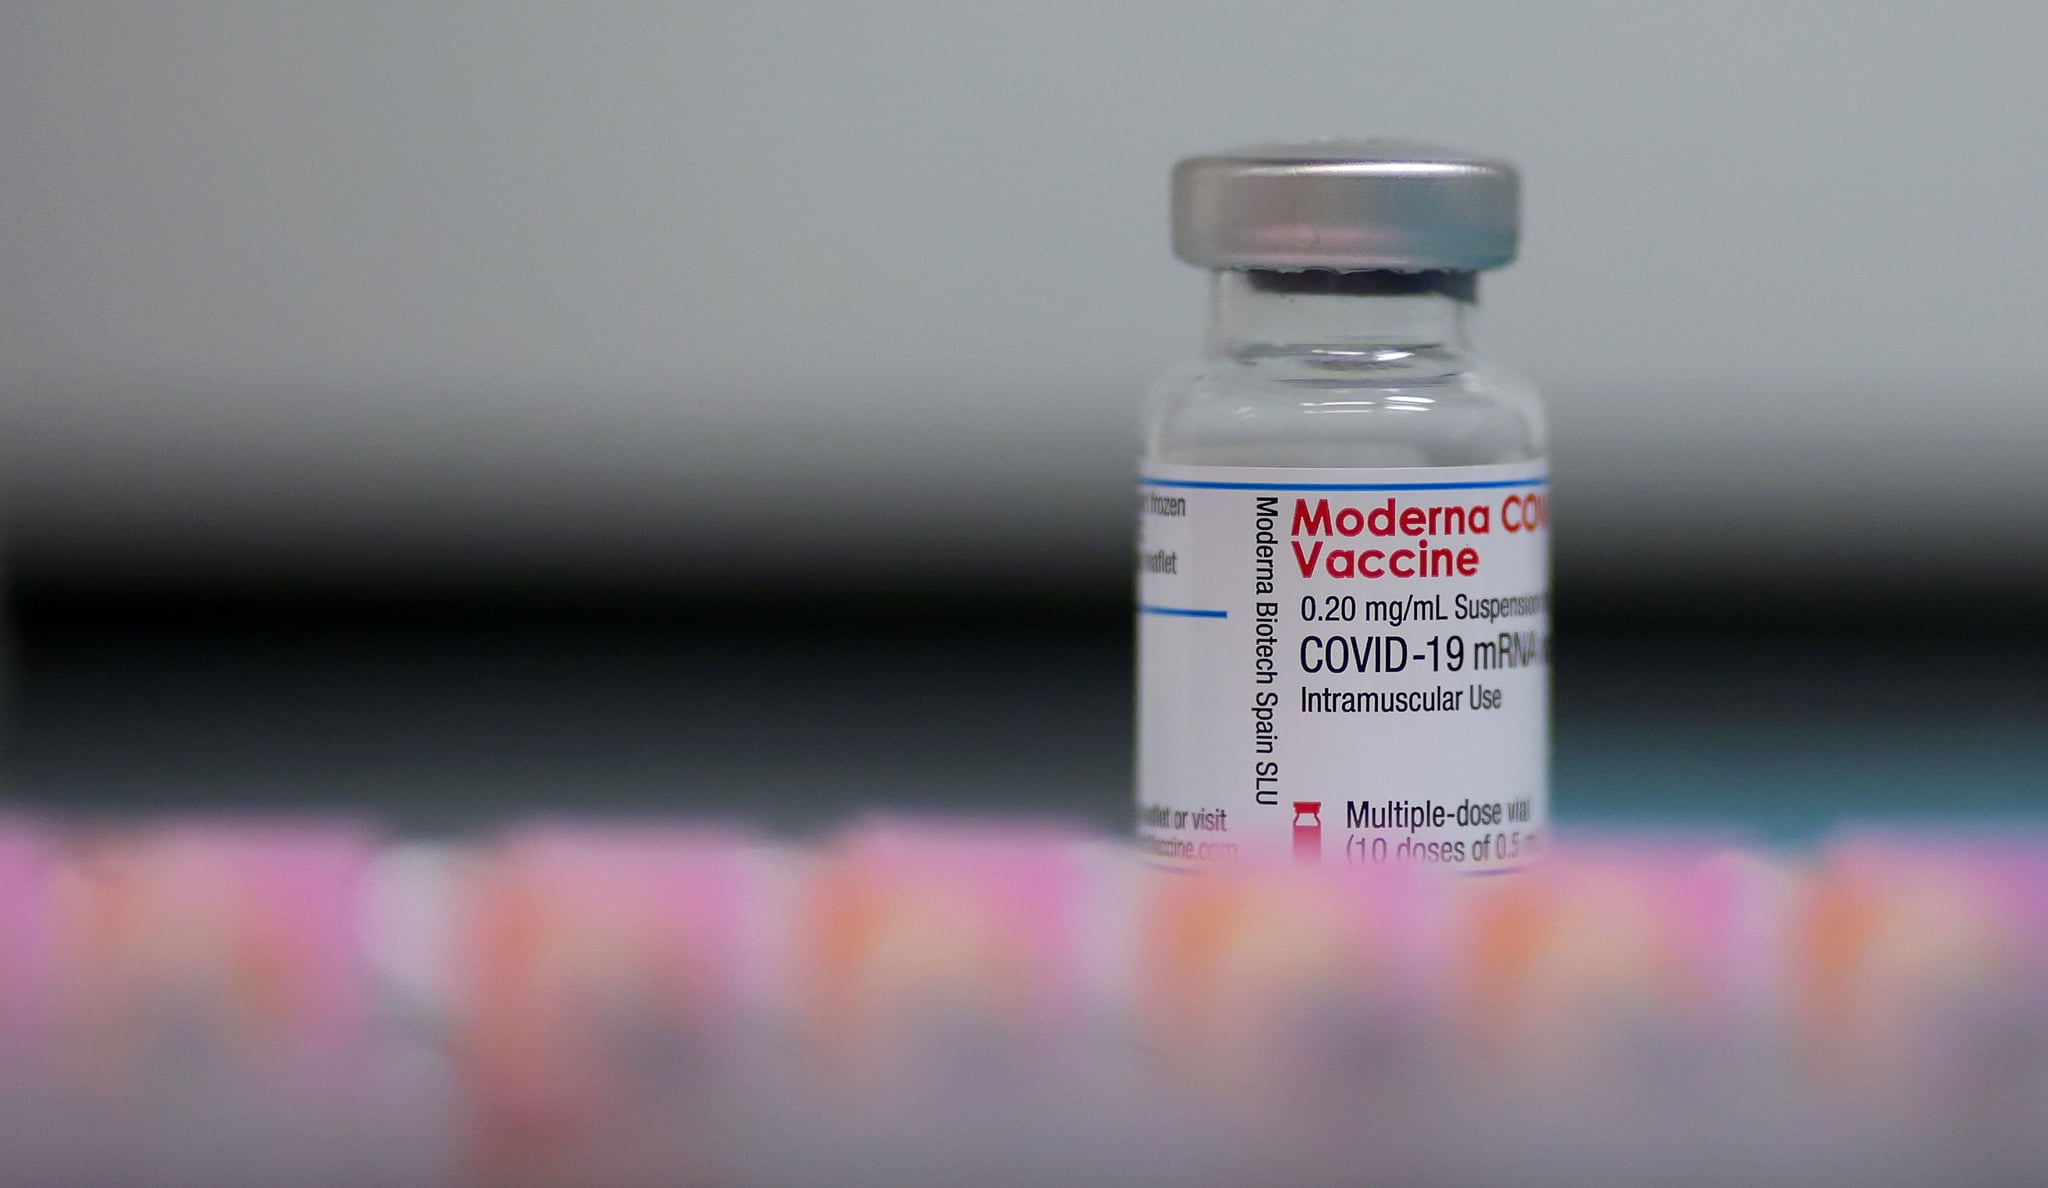 A vial with the Moderna Covid-19 vaccine is displayed at the corona vaccination centre at the University hospital in Magdeburg, eastern Germany, on January 22, 2021. (Photo by Ronny Hartmann / AFP) (Photo by RONNY HARTMANN/AFP via Getty Images)